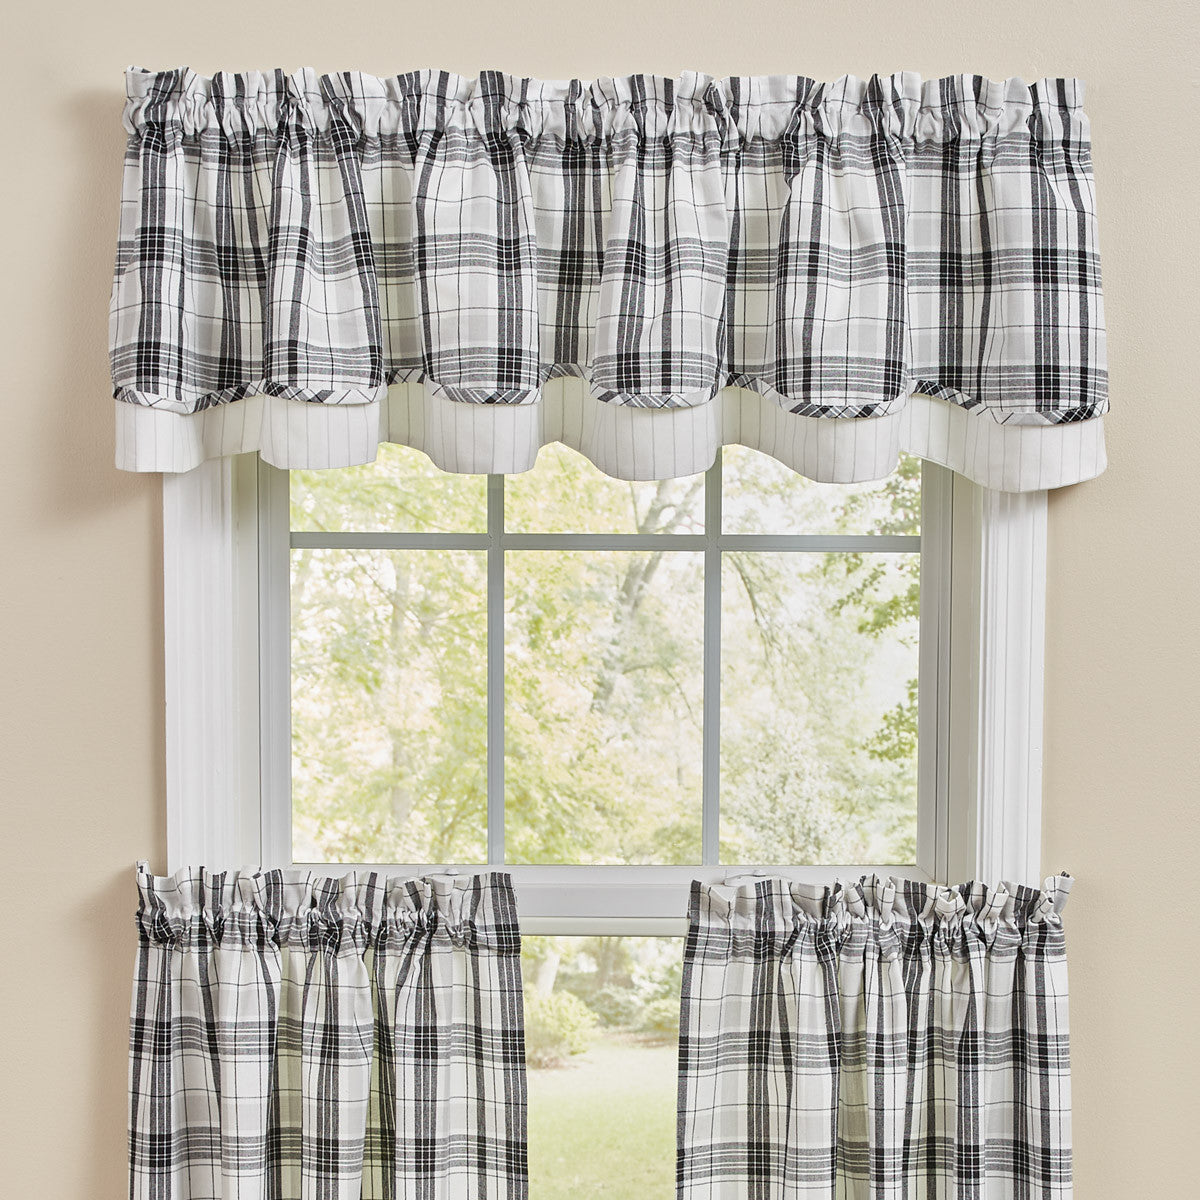 Refined Rustic Valance - Lined Layered 72x16 Park designs